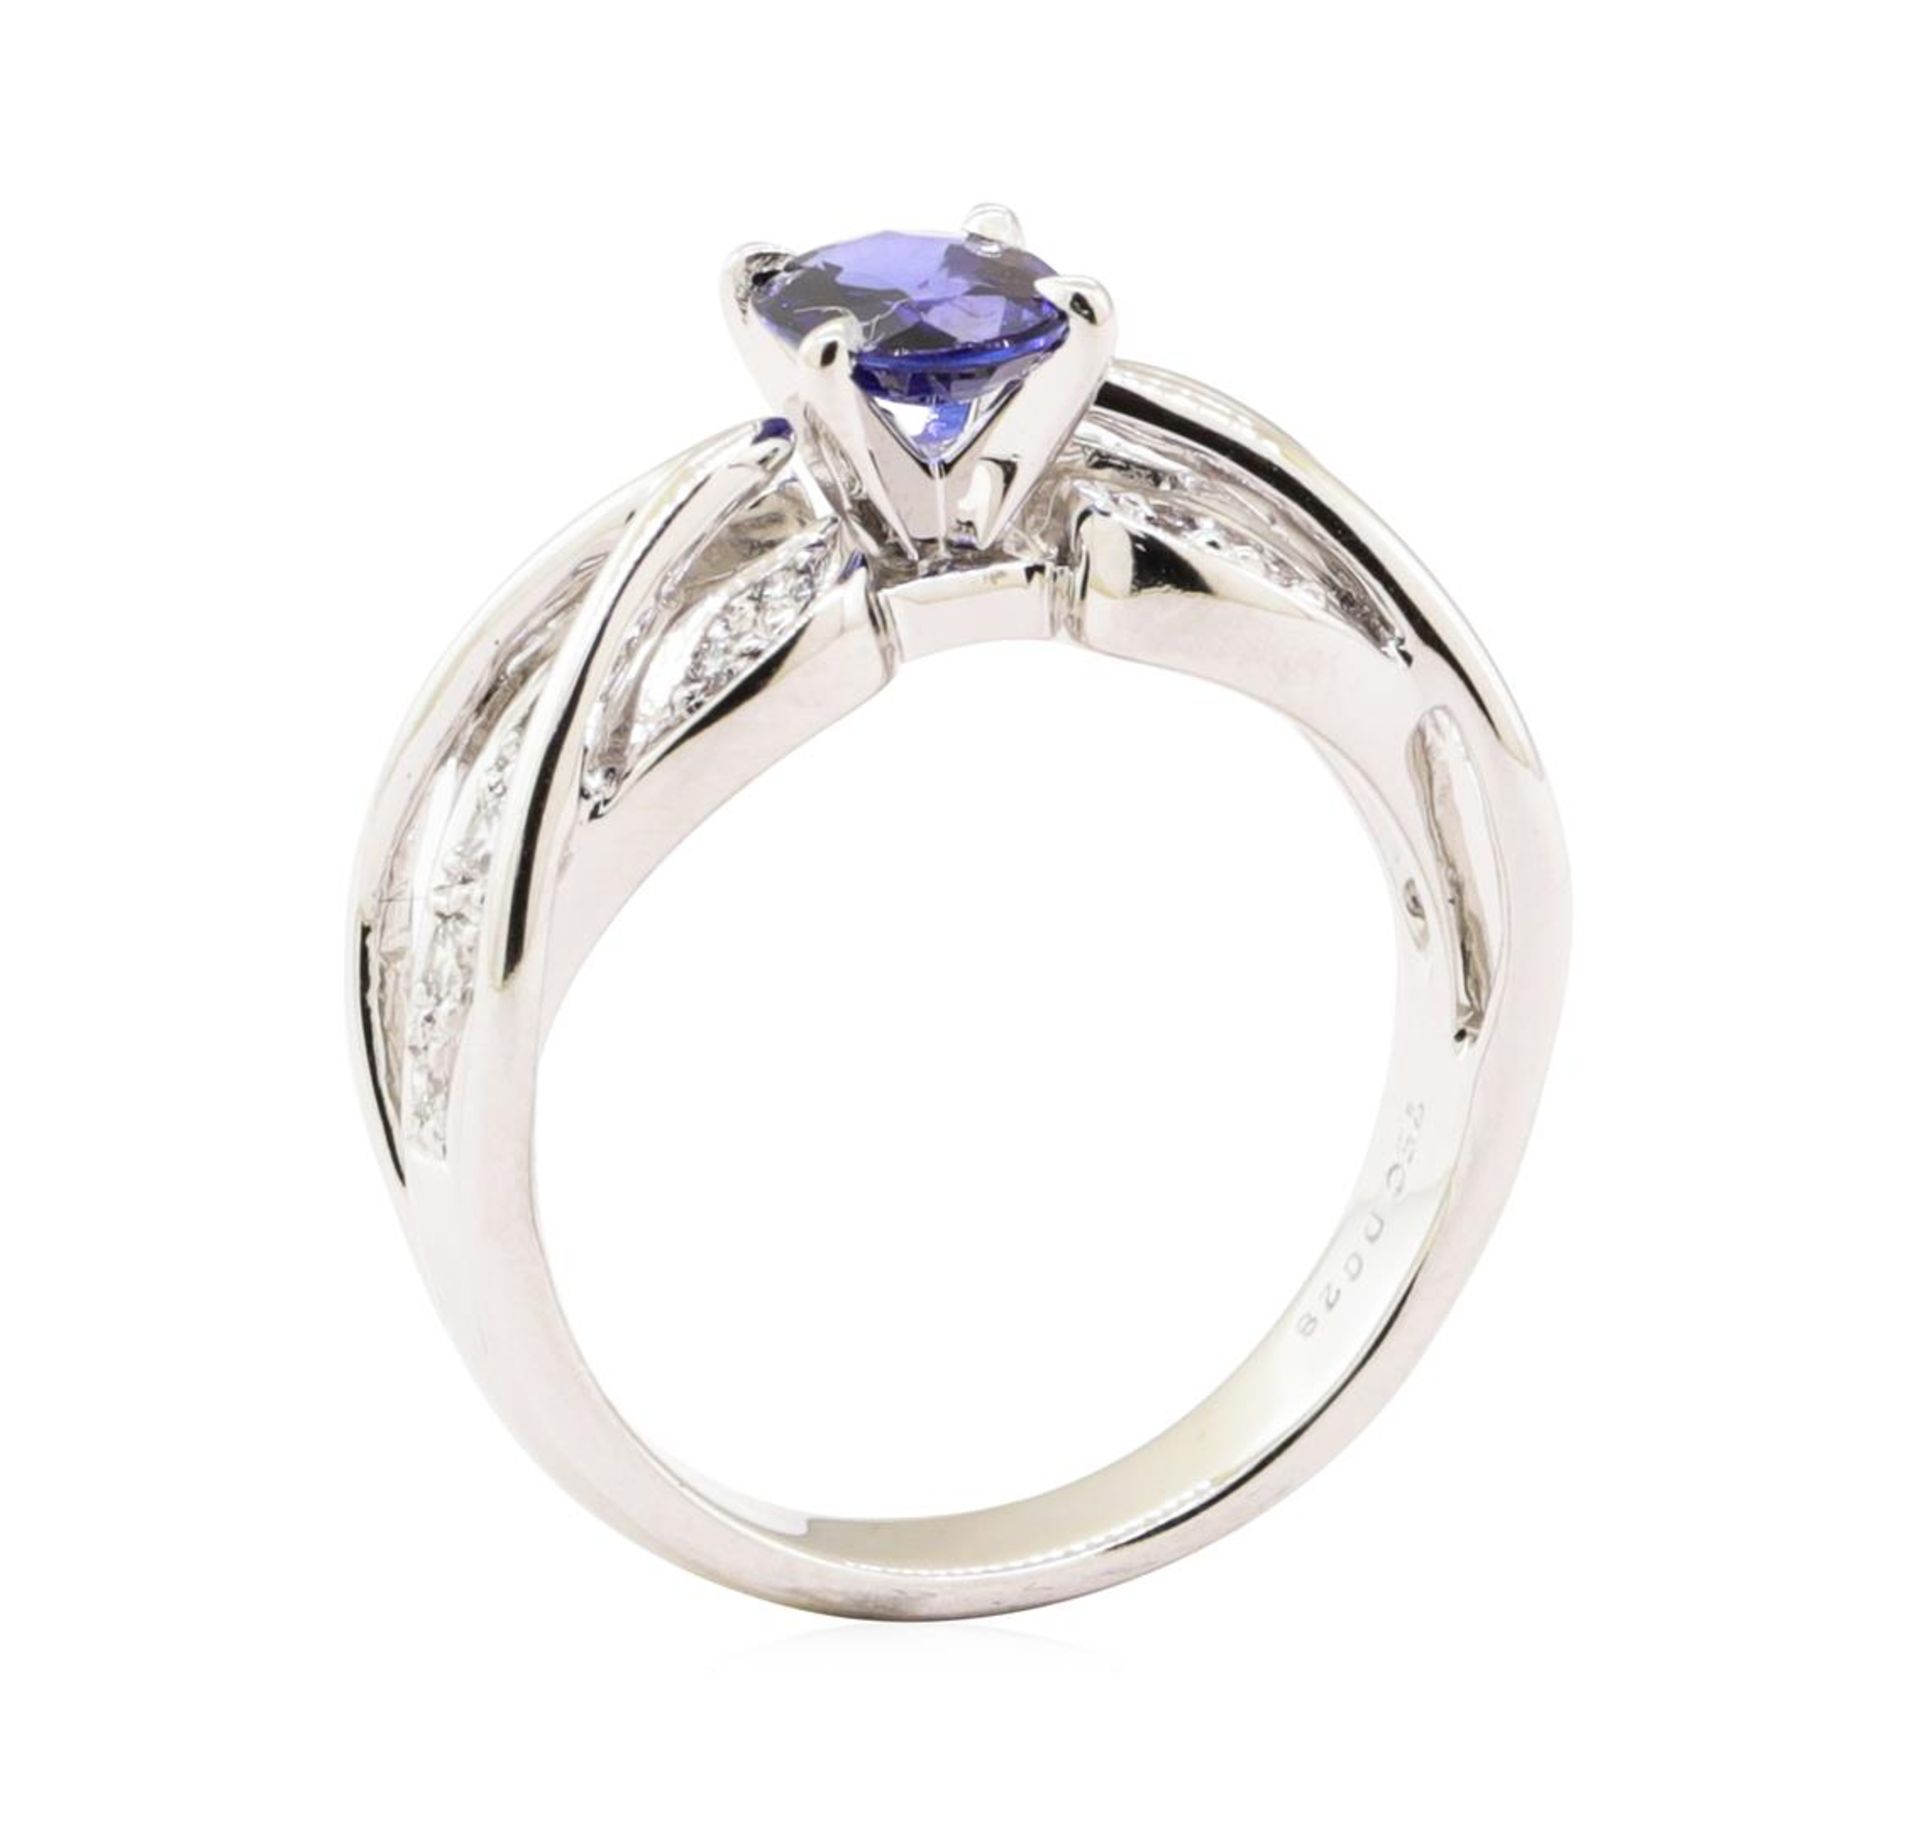 1.10 ctw Blue Sapphire And Diamond Ring - 18KT White Gold - Image 4 of 5